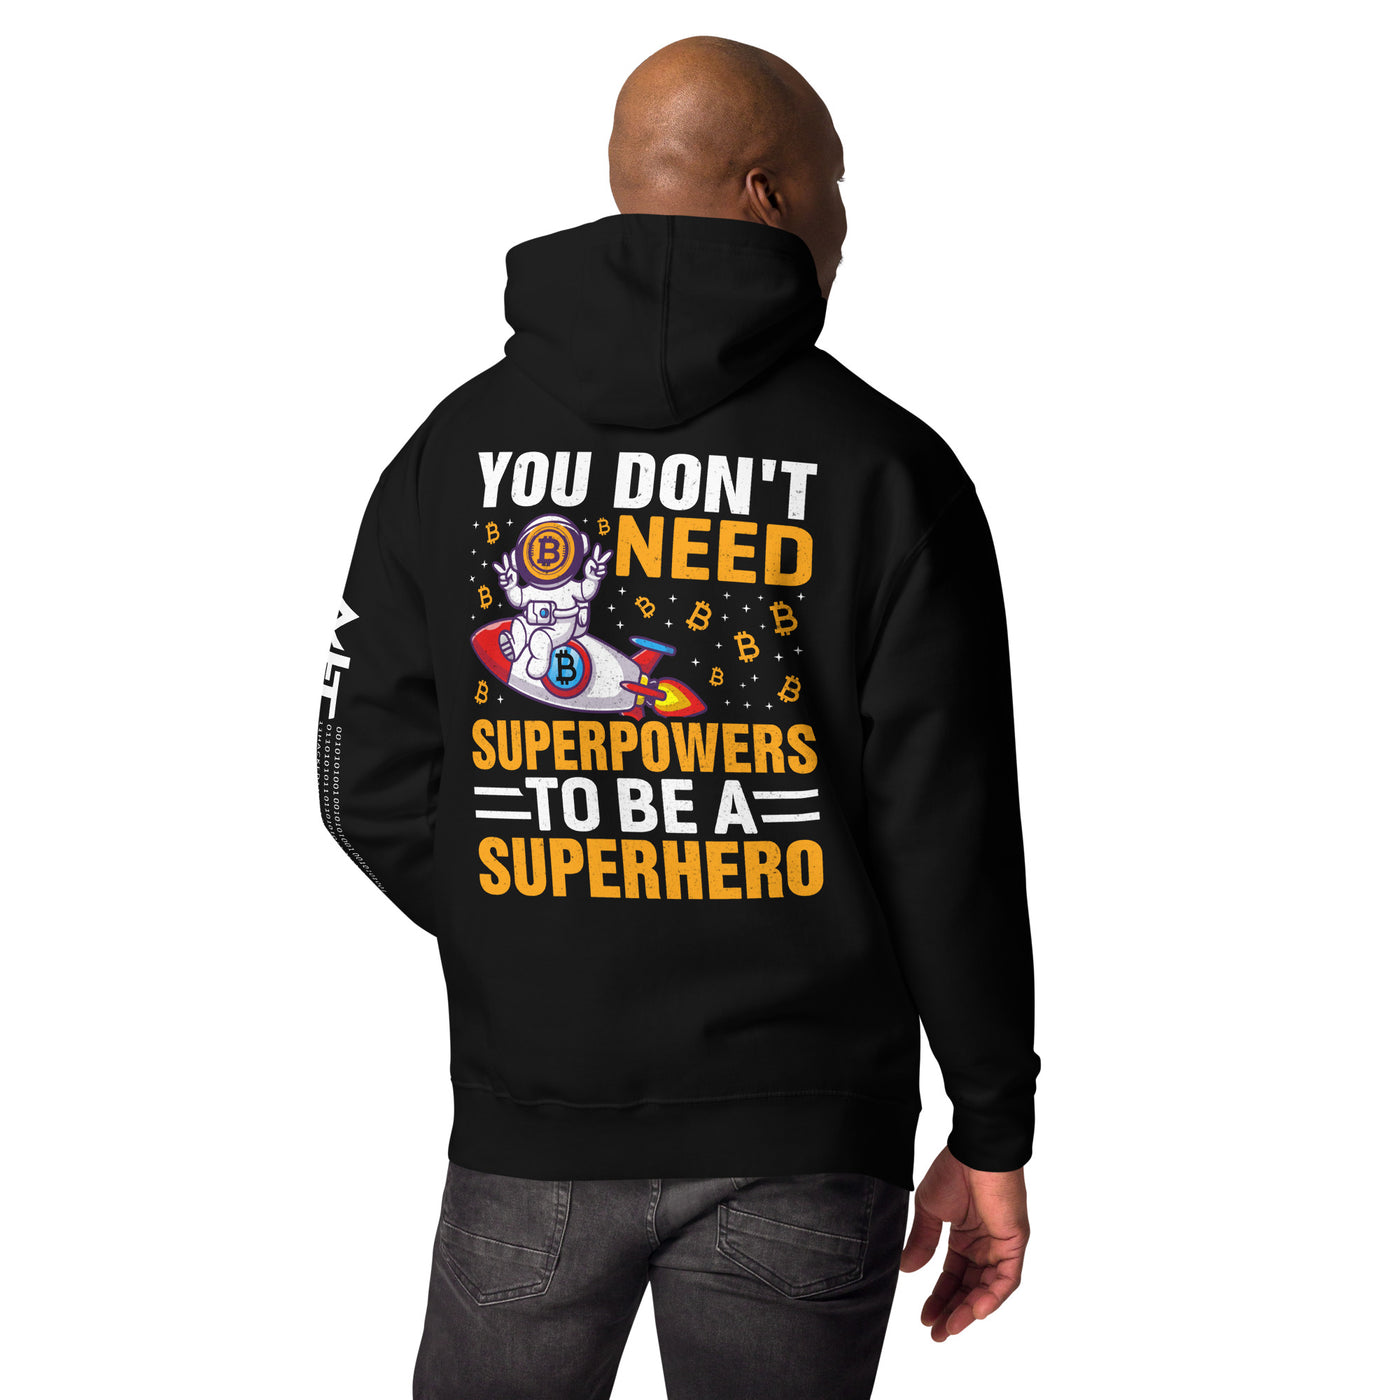 I am not a Player, I am a Gamer, Players get Chicks, I get Bullied at School - Unisex Hoodie ( Back Print )